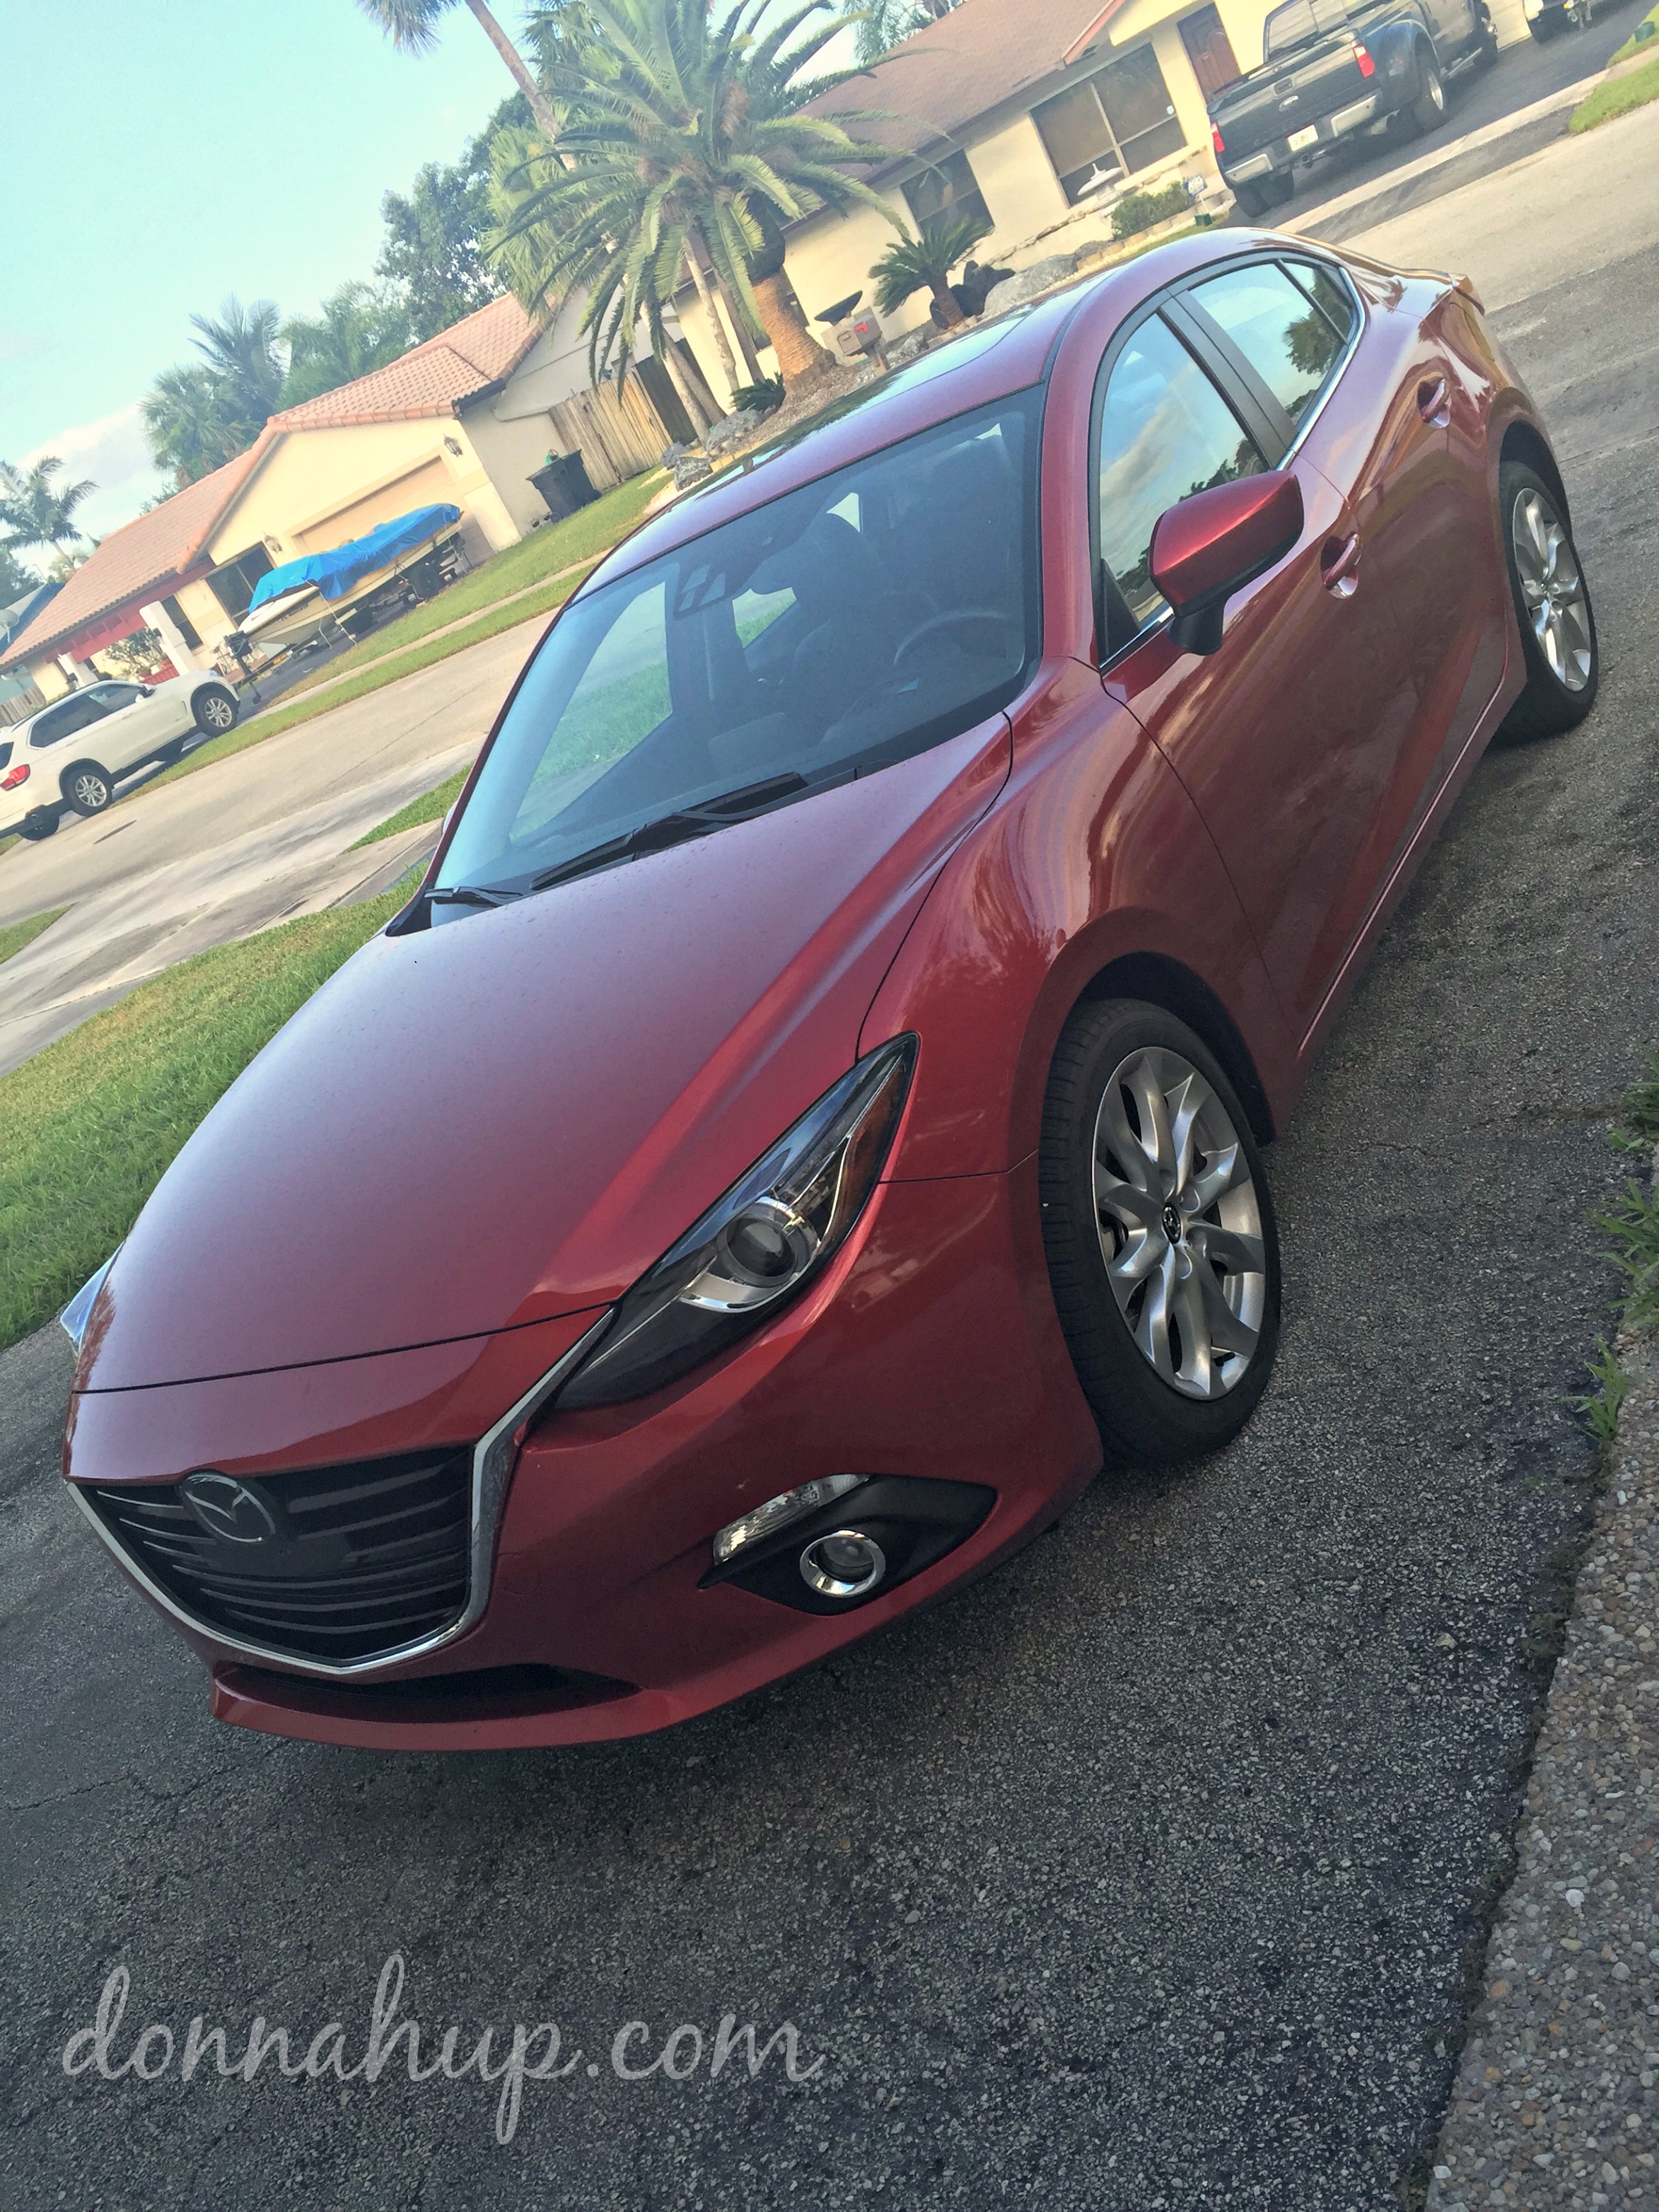 Taking a Road Trip in the Mazda 3